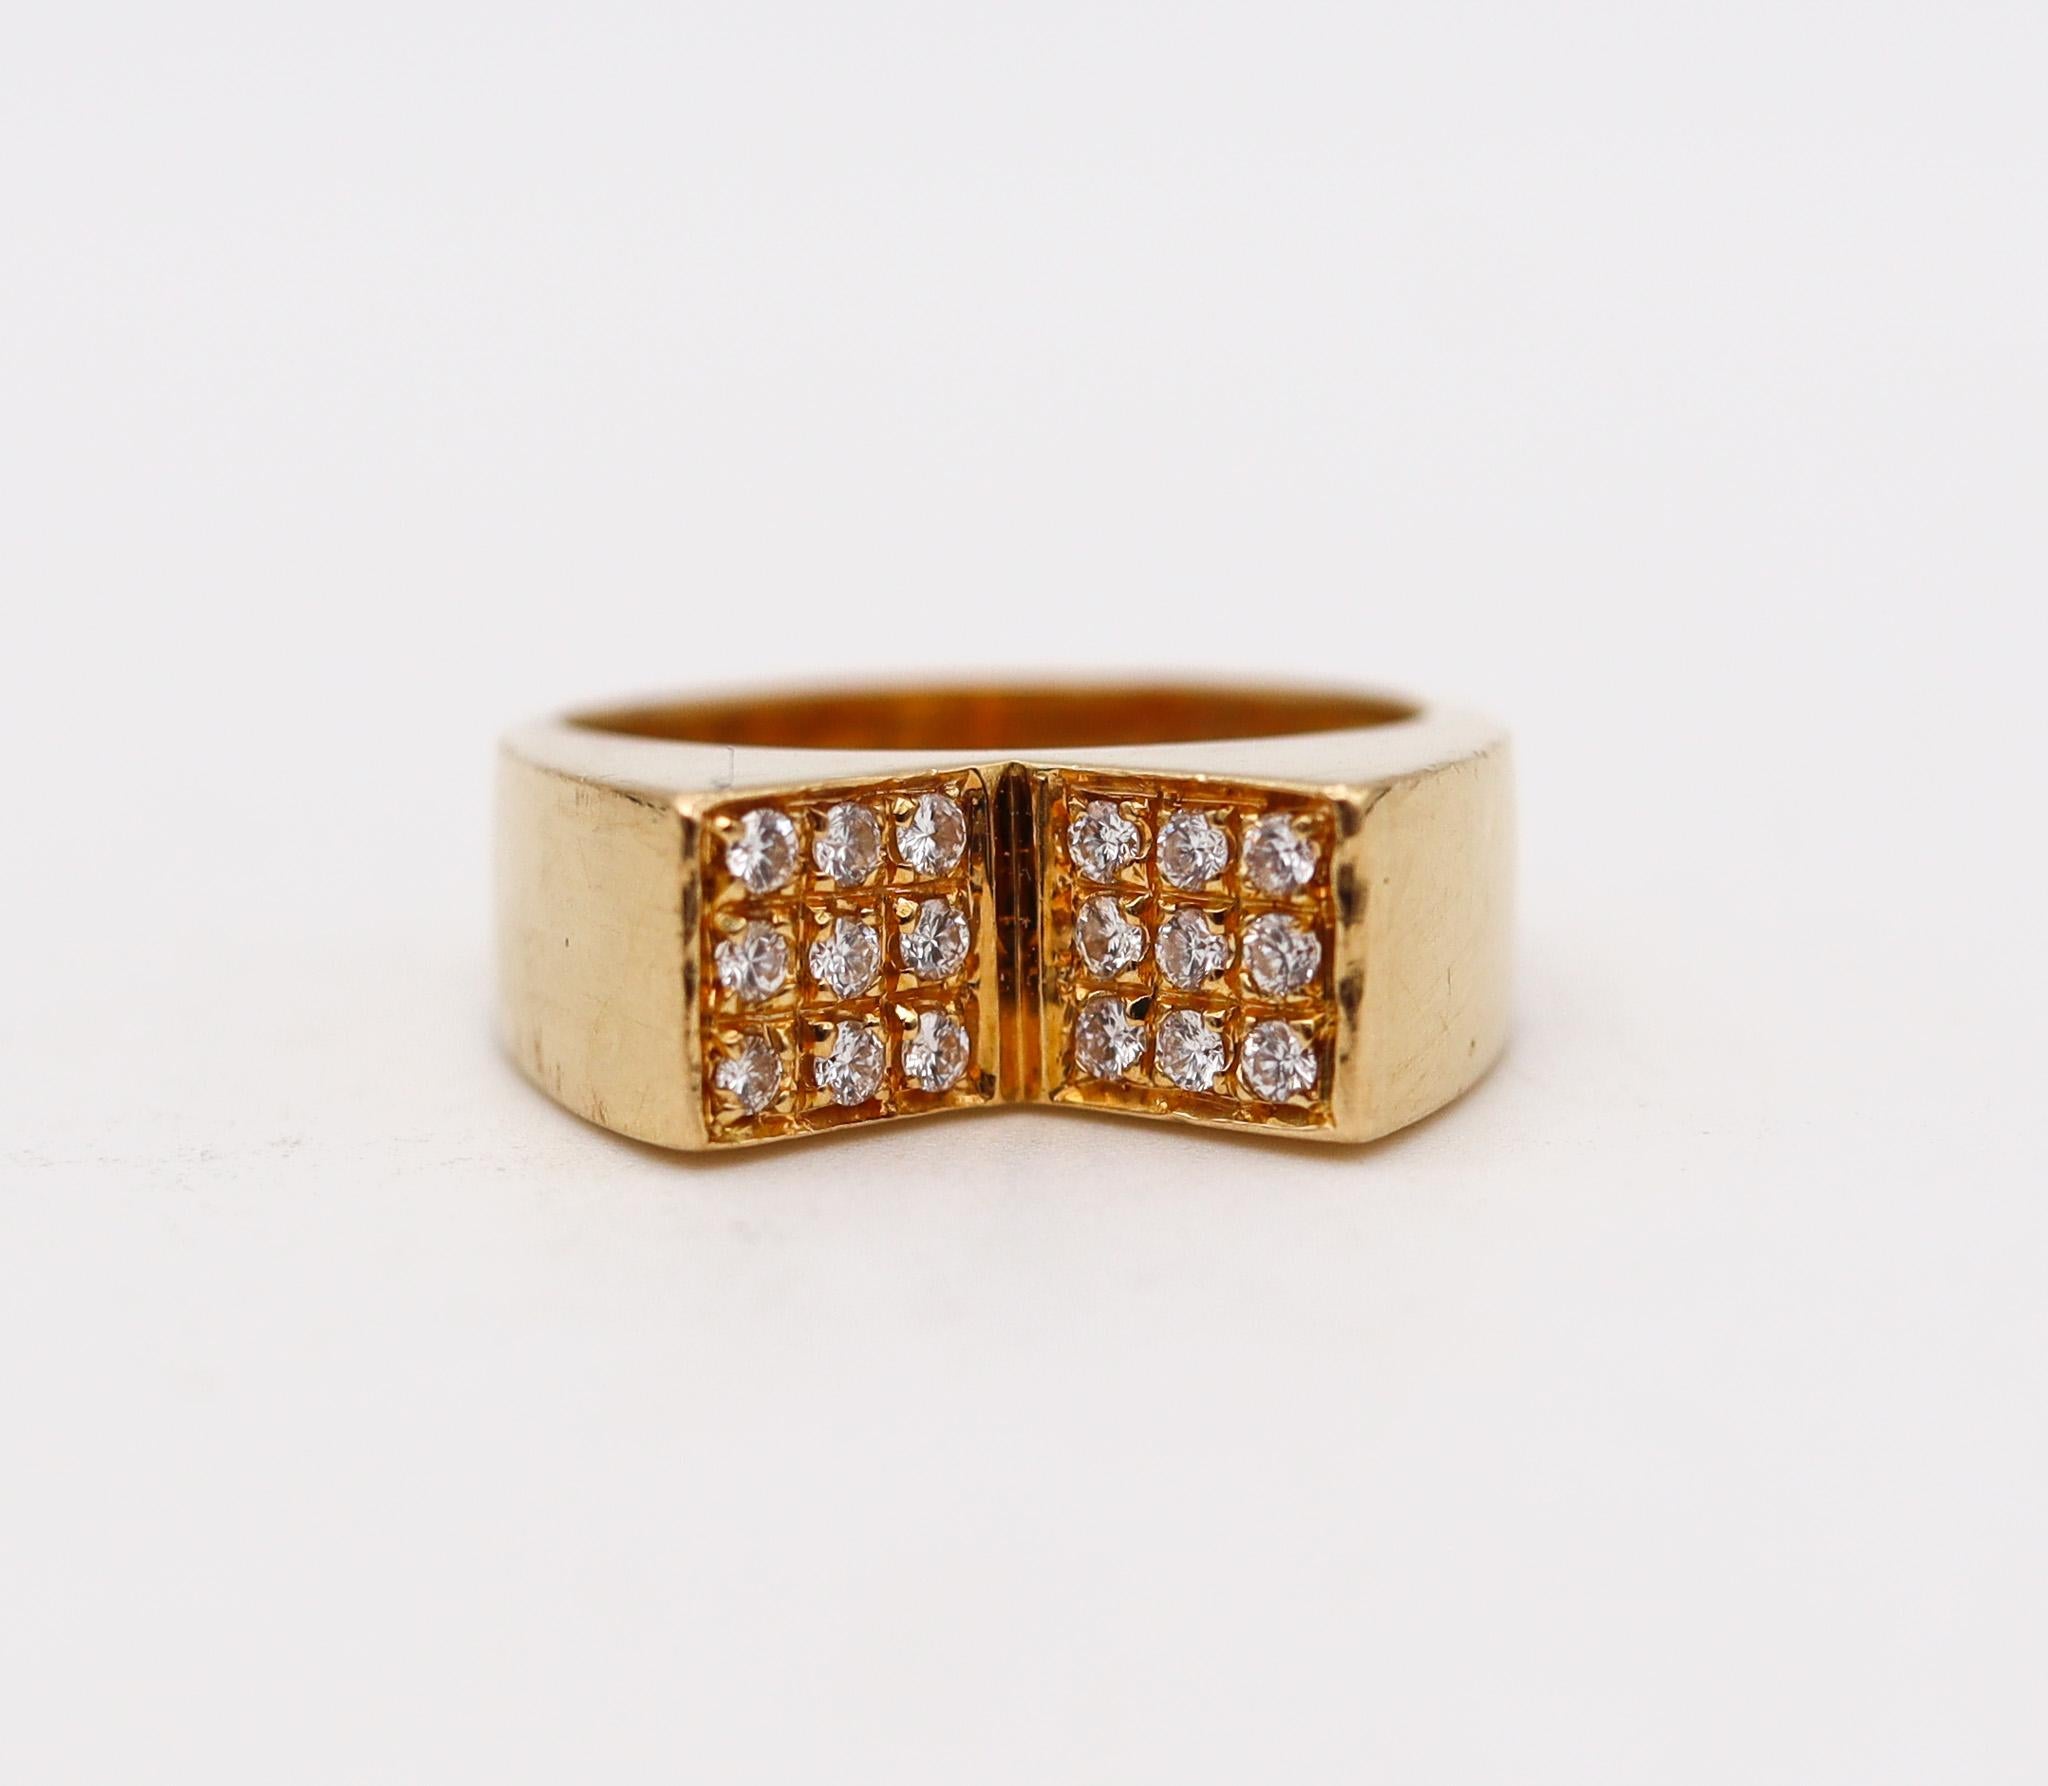 Geometric modernist ring designed by Cartier.

An unusual sculptural V shaped ring, created by the house of Cartier, back in the 1970. It was crafted with geometric patterns in solid yellow gold of 18 karats with high polished finish. 

Diamonds: